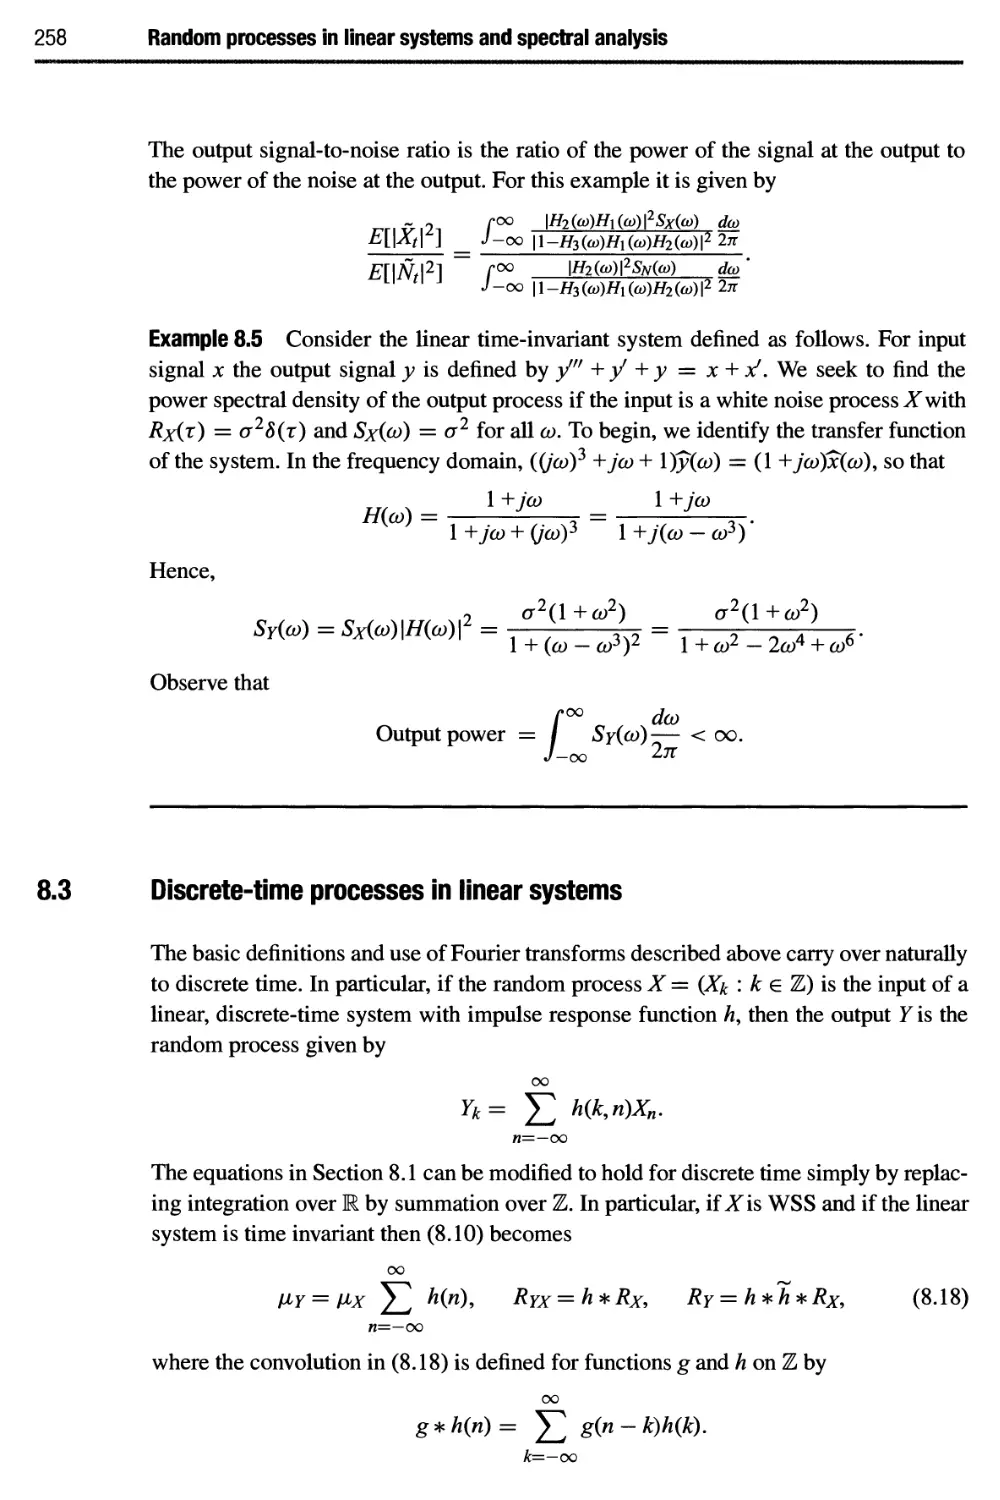 8.3 Discrete-time processes in linear systems 258